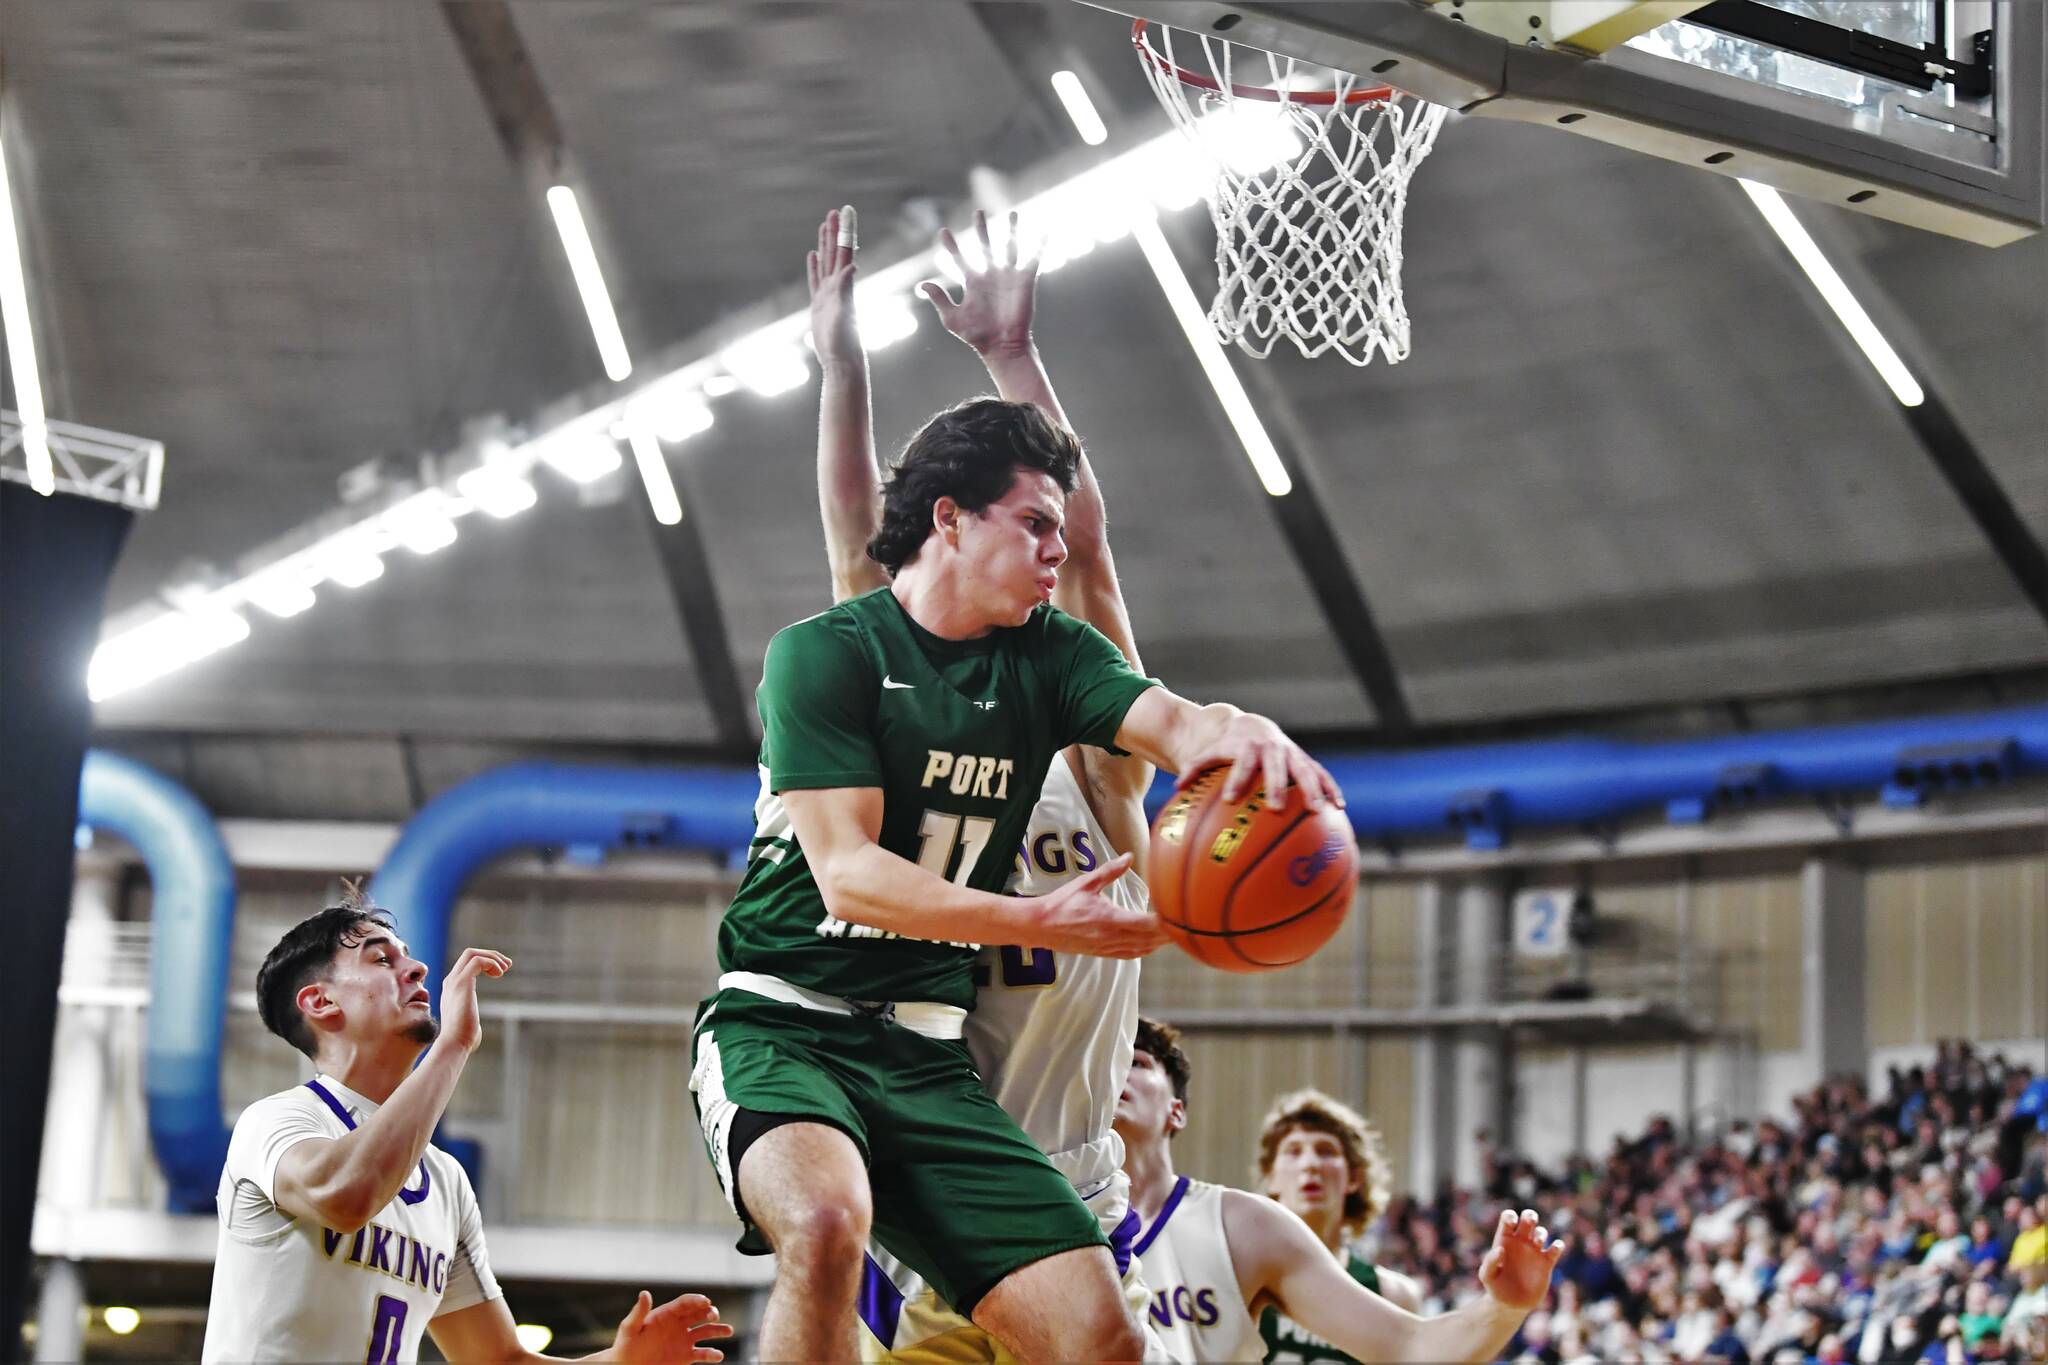 Jordan Nailon/The Daily News Port Angeles’ Xander Maestas drives during the Roughriders’ 75-58 Class 2A state quarterfinal loss to North Kitsap on Thursday night at the Yakima Valley SunDome.